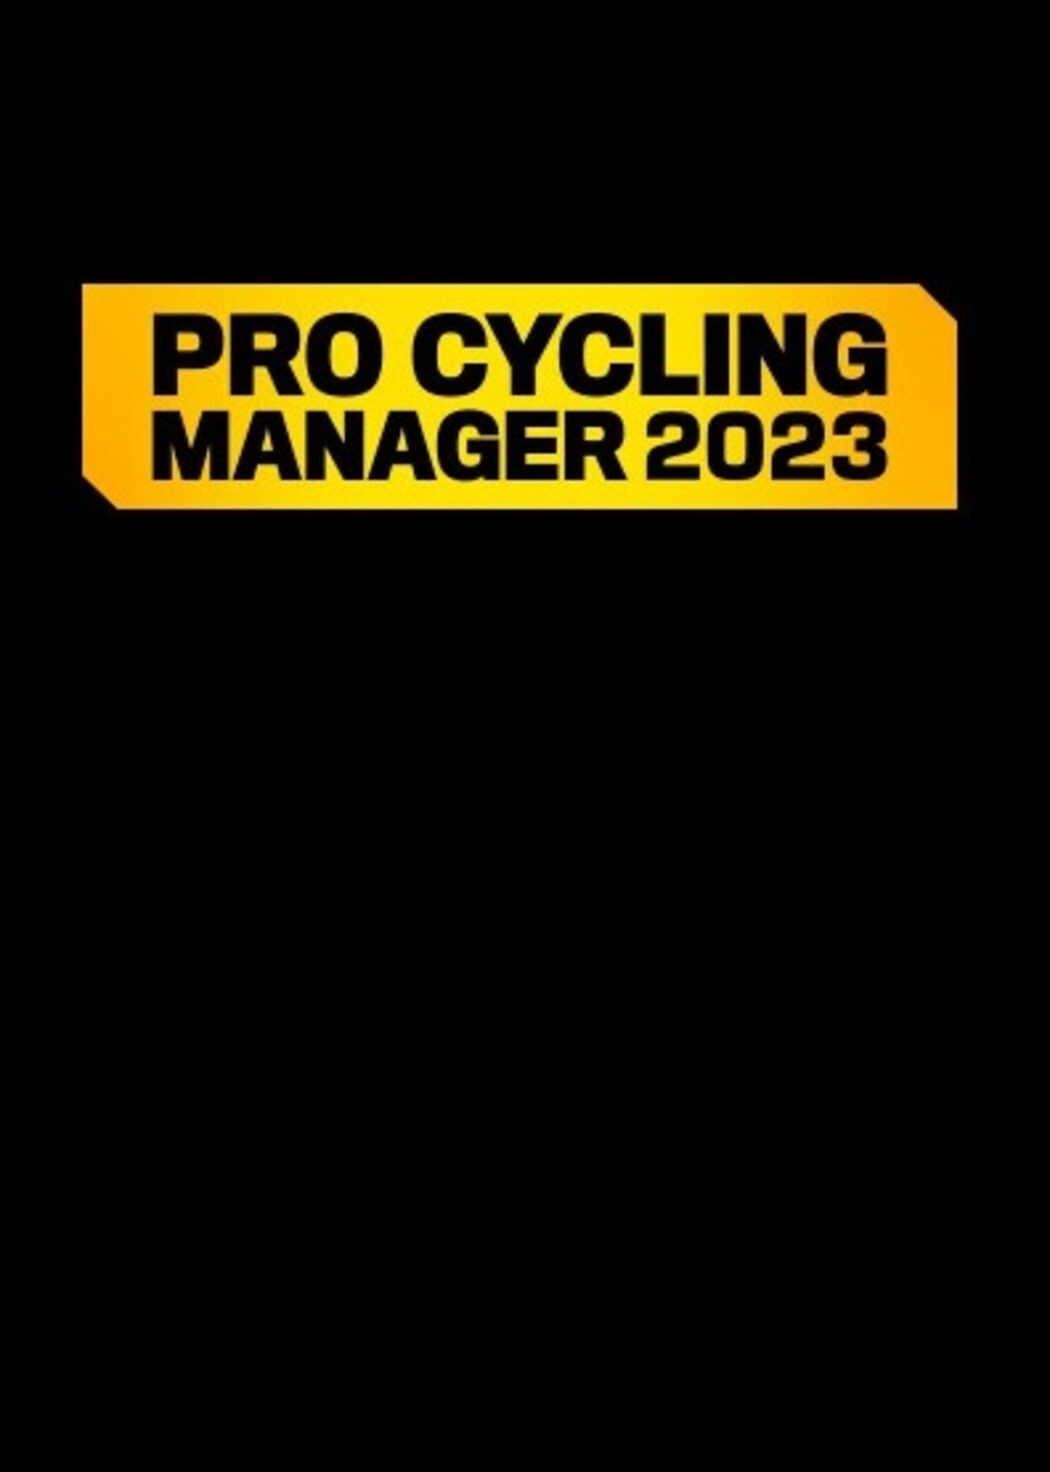 Pro Cycling Manager 2022 (PC) Key cheap - Price of $6.52 for Steam